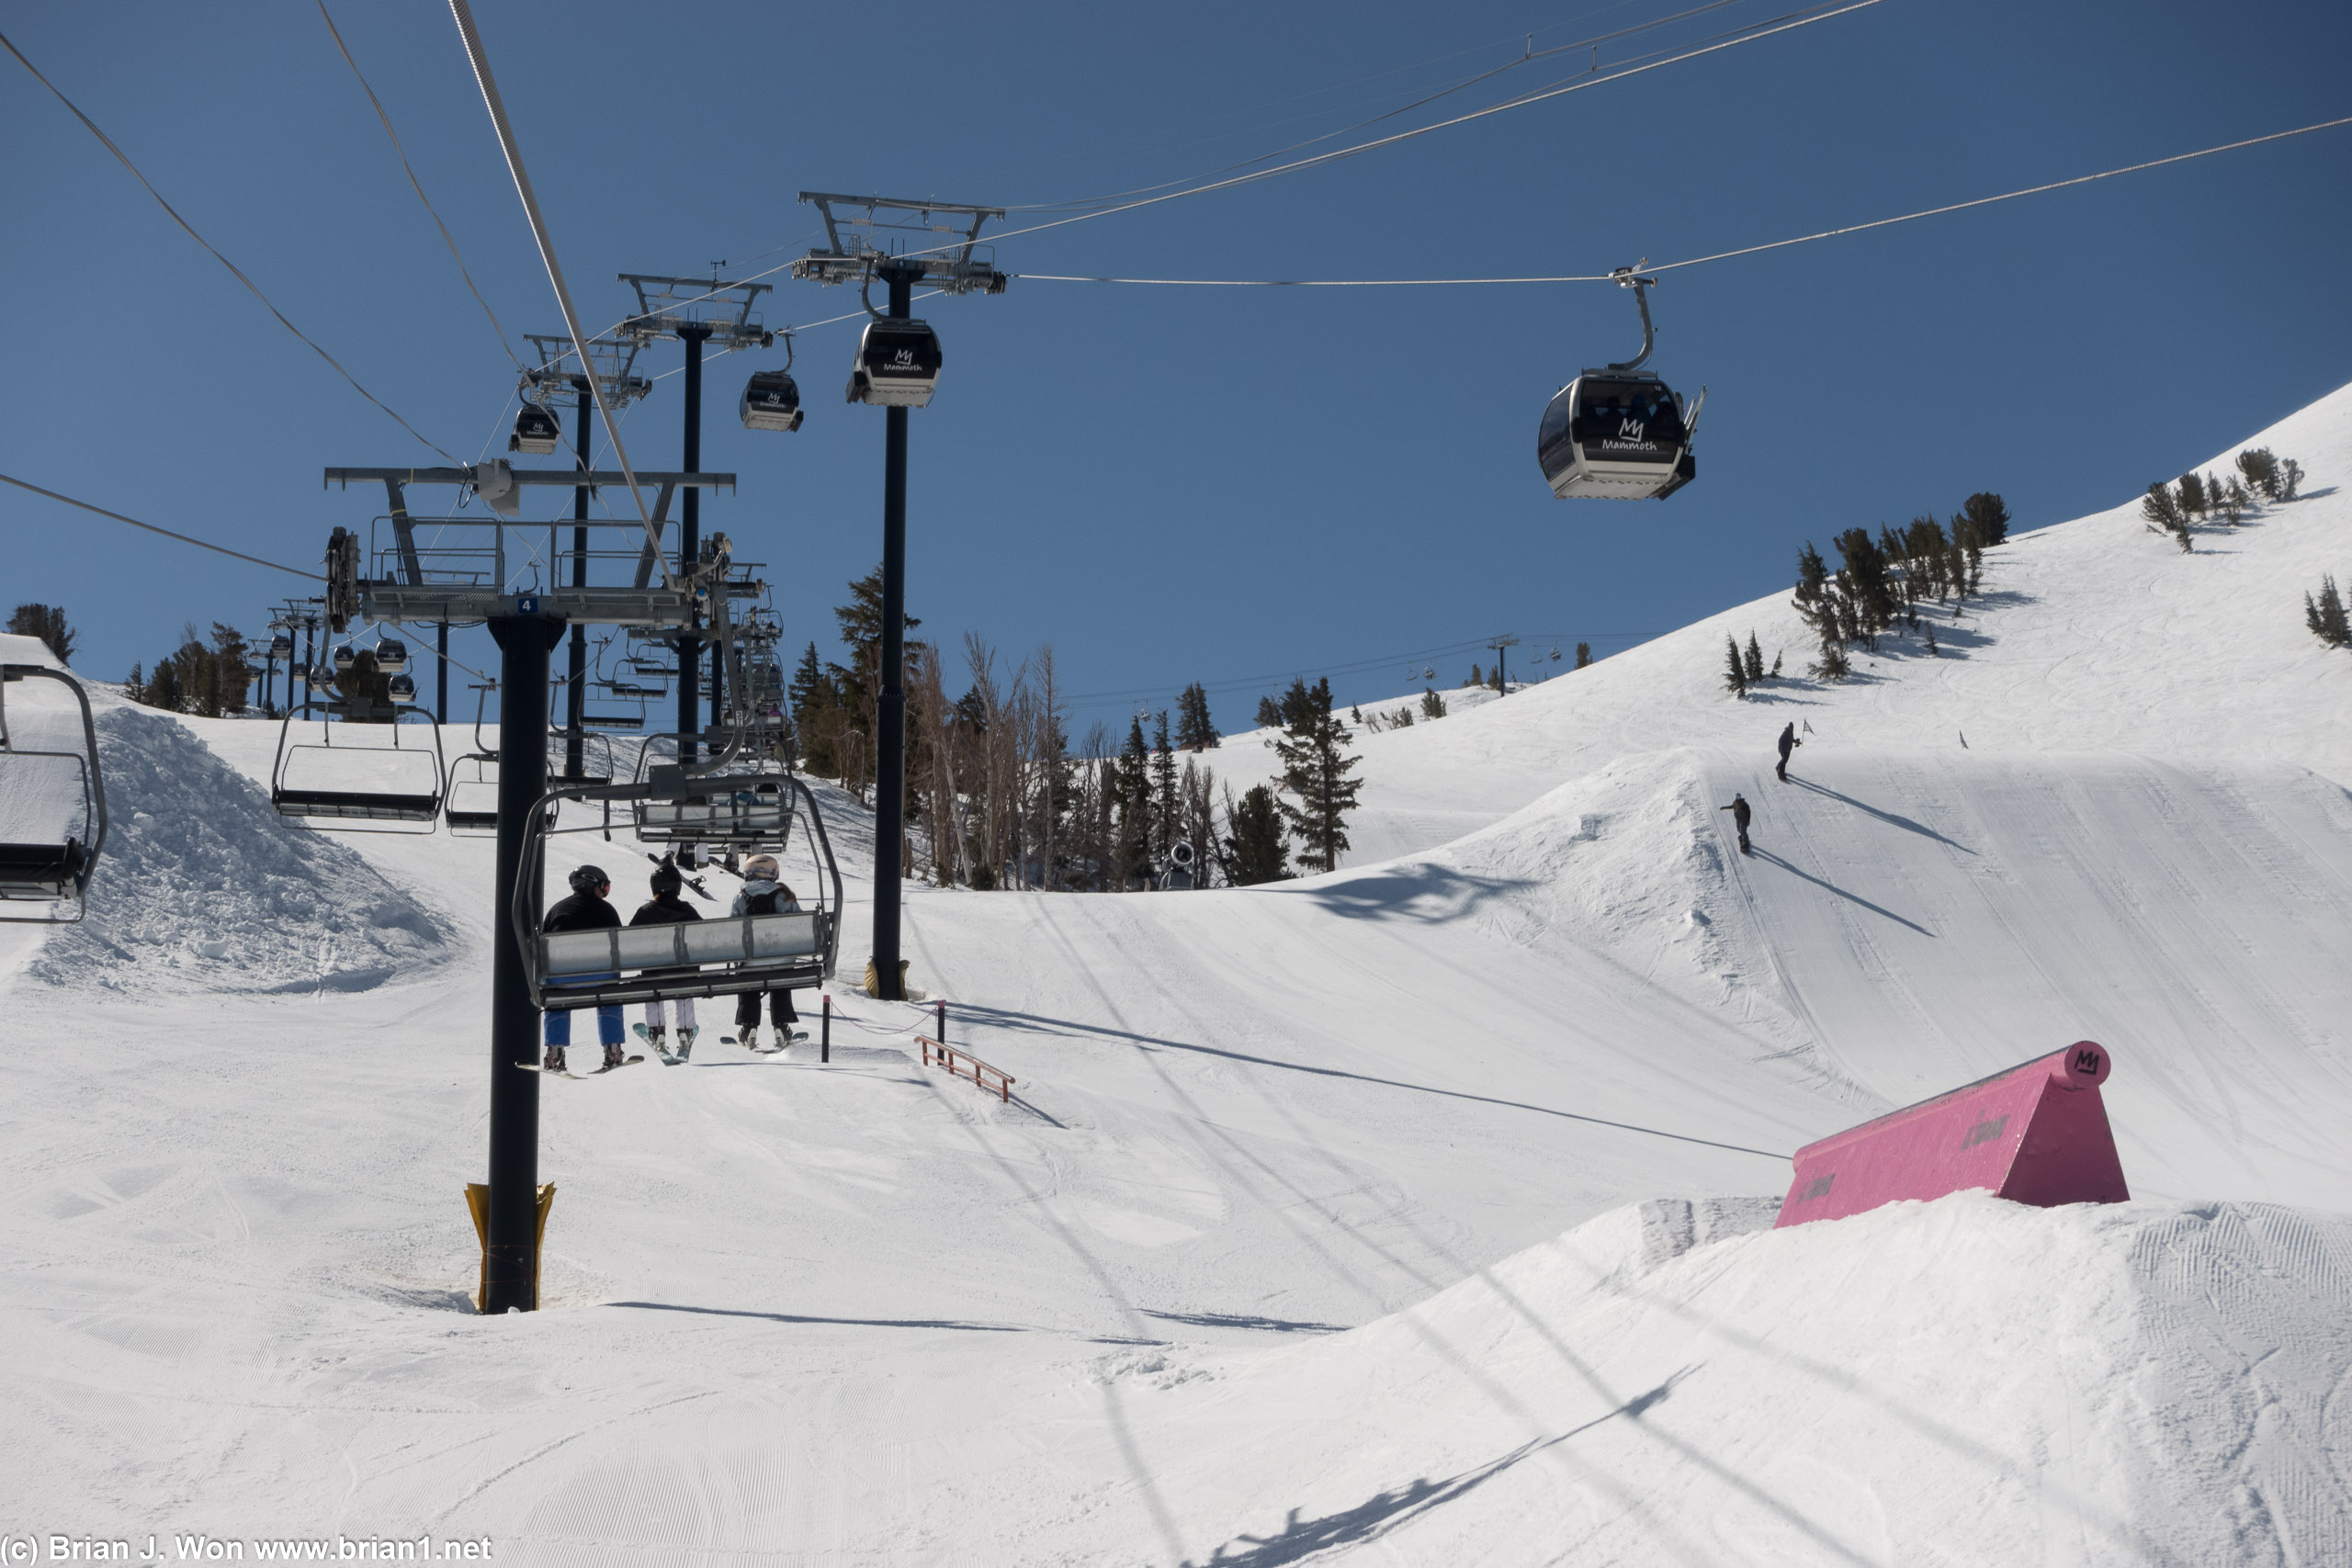 Unbound Express, Panorama Gondola, and the main terrain park below.